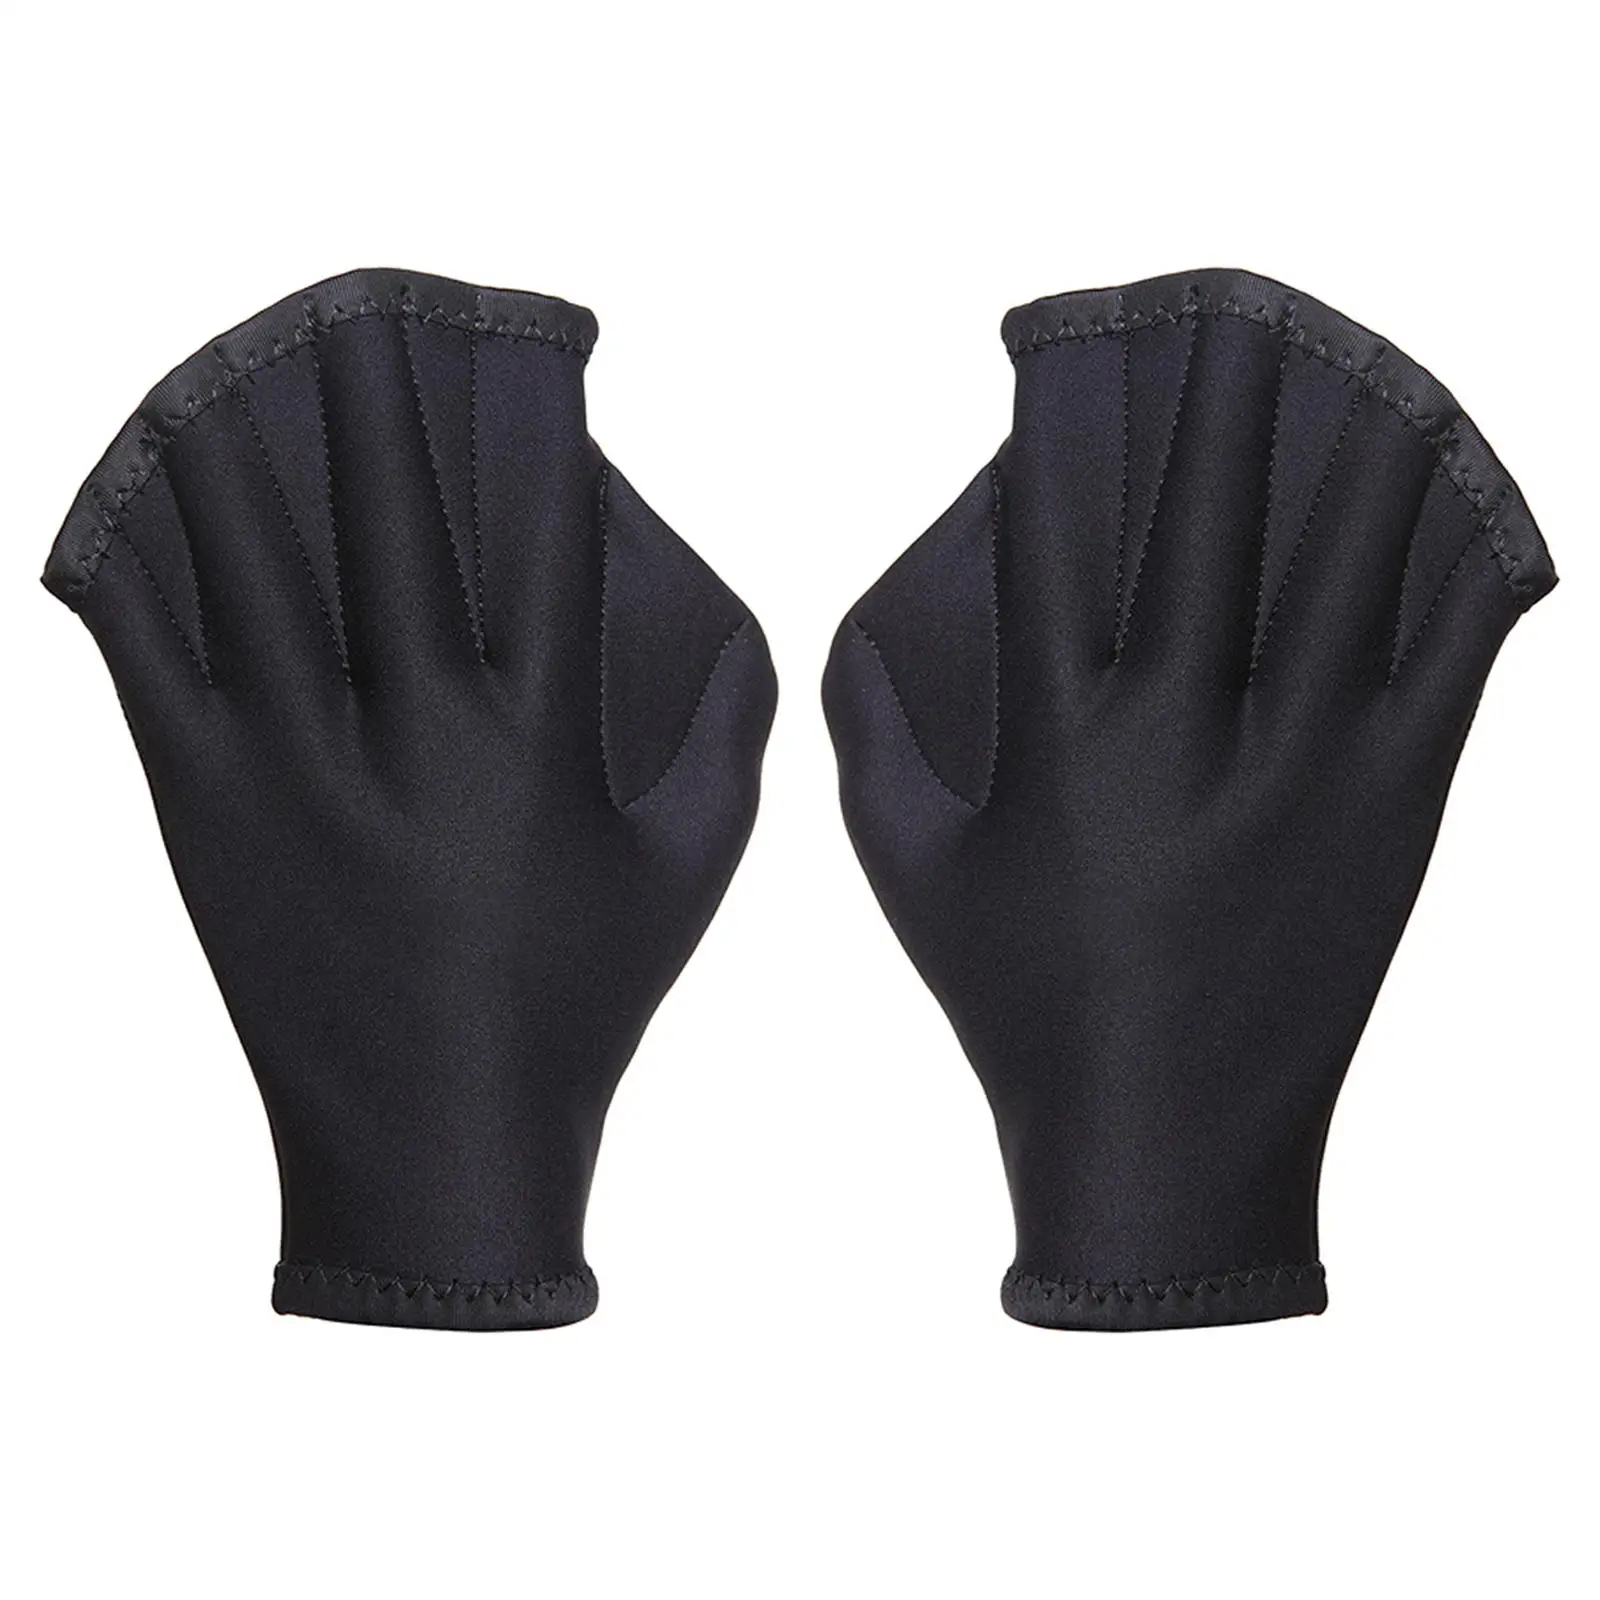 1 Pair Aquatic Swimming Gloves , Webbed Fingers Fitness (Black) for Exercise Training